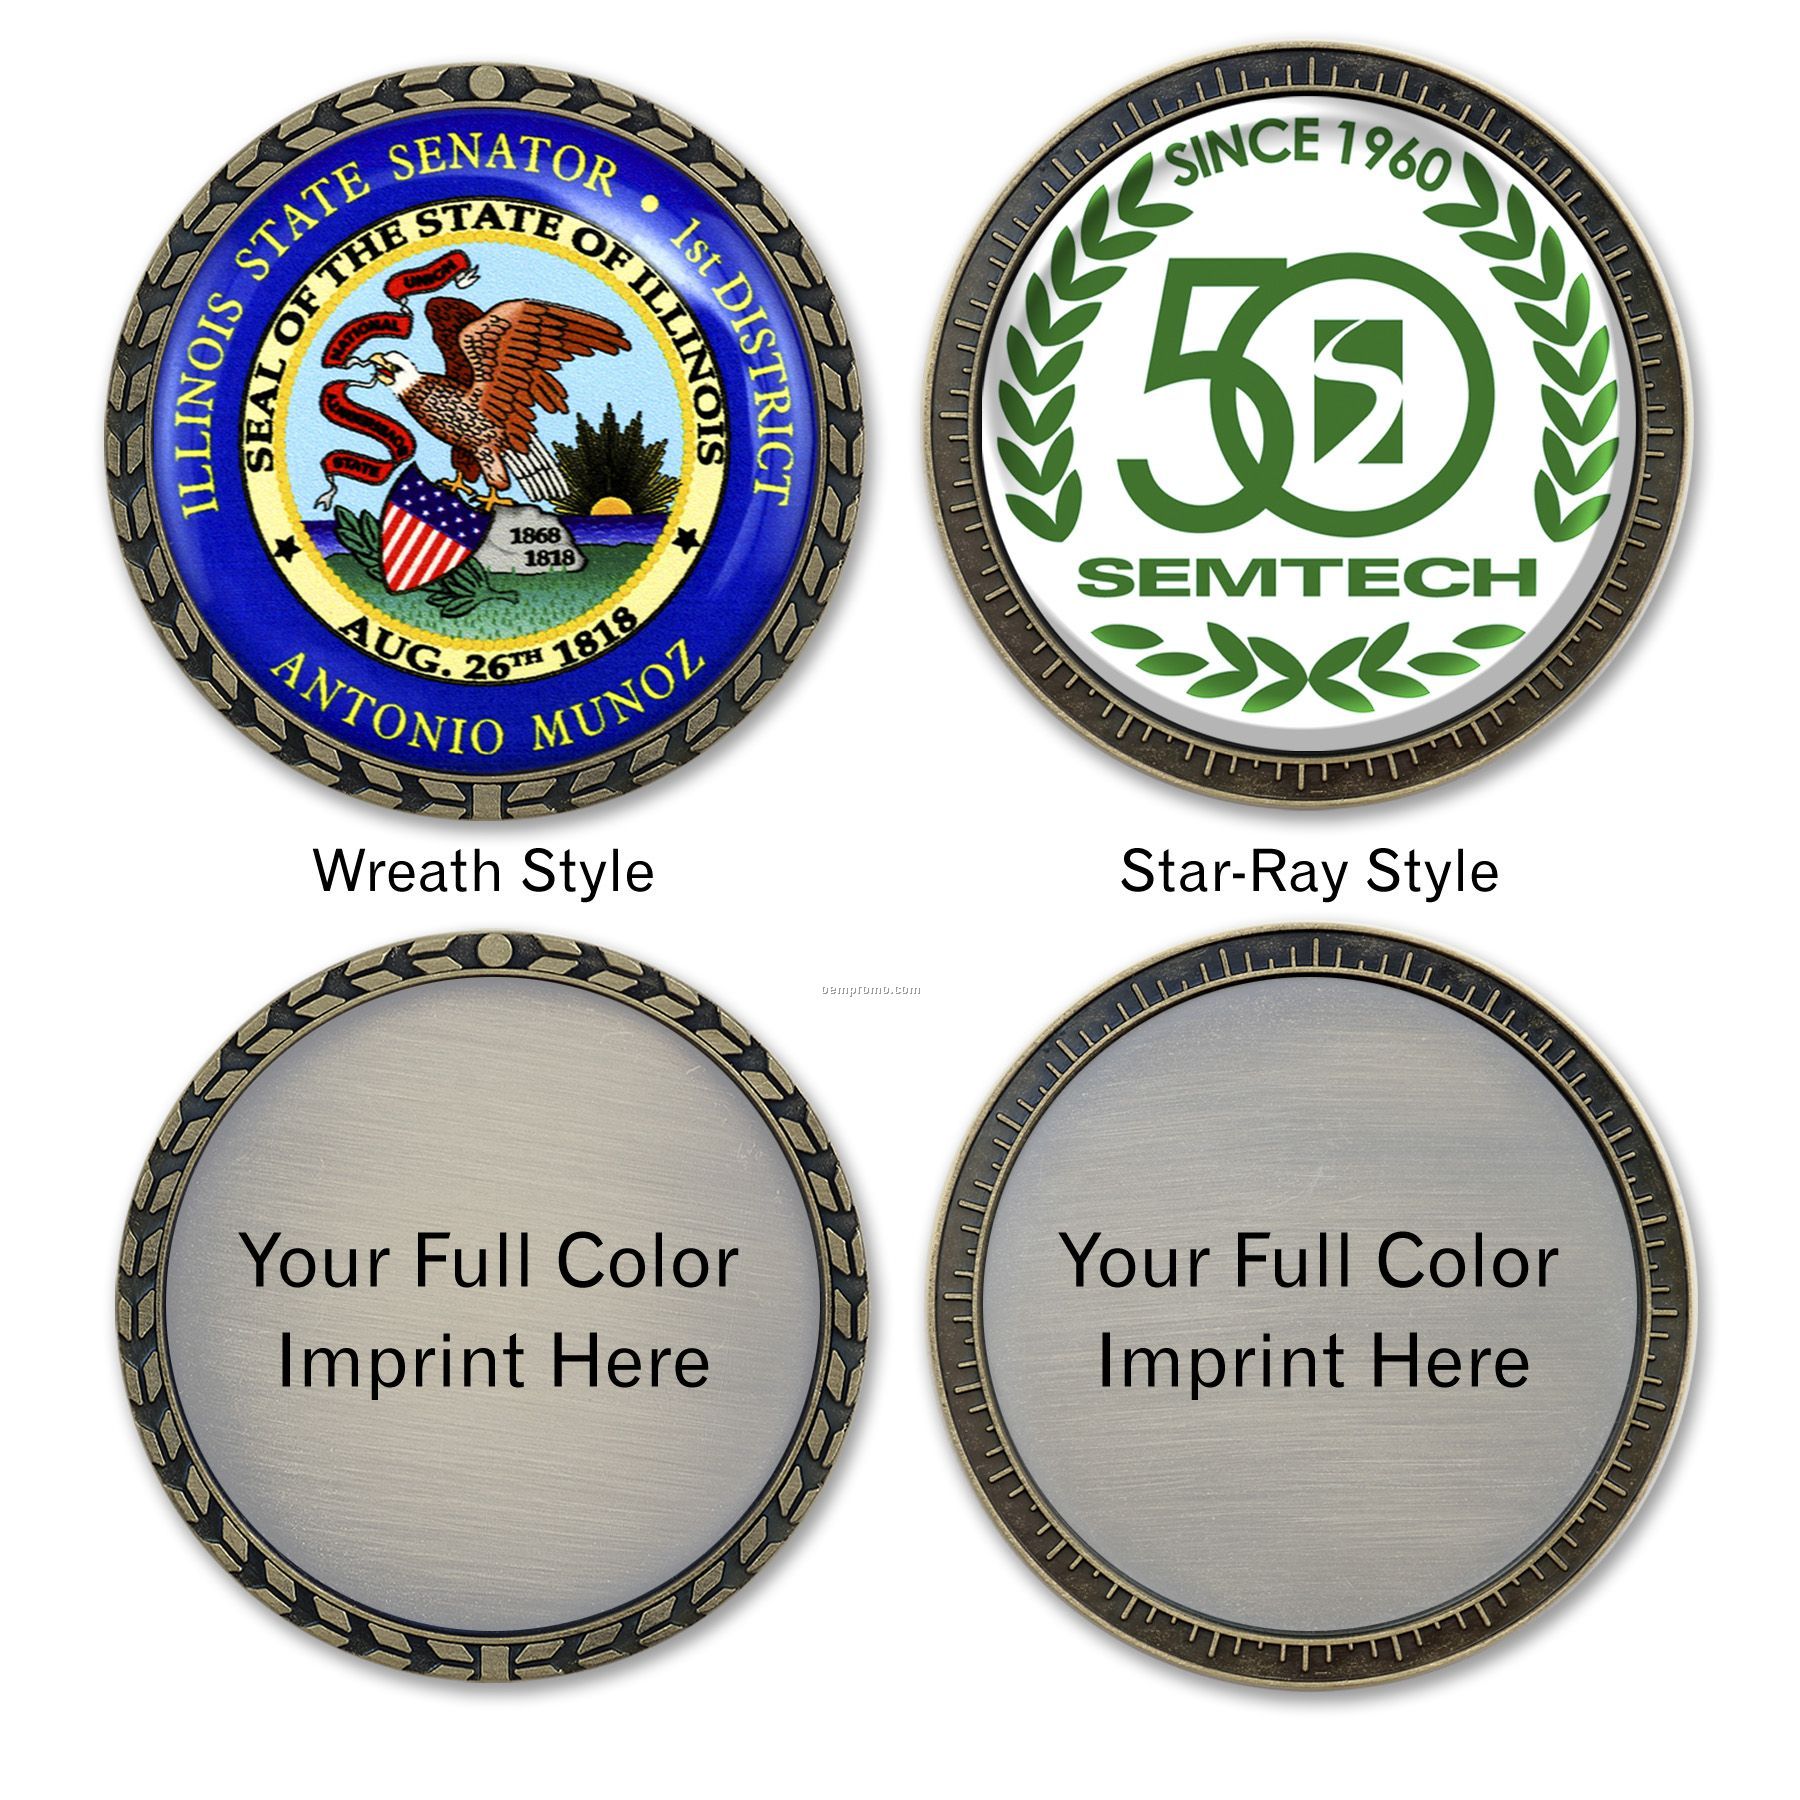 Die Cast "Speed" Challenge Coin With Full Color Imprint